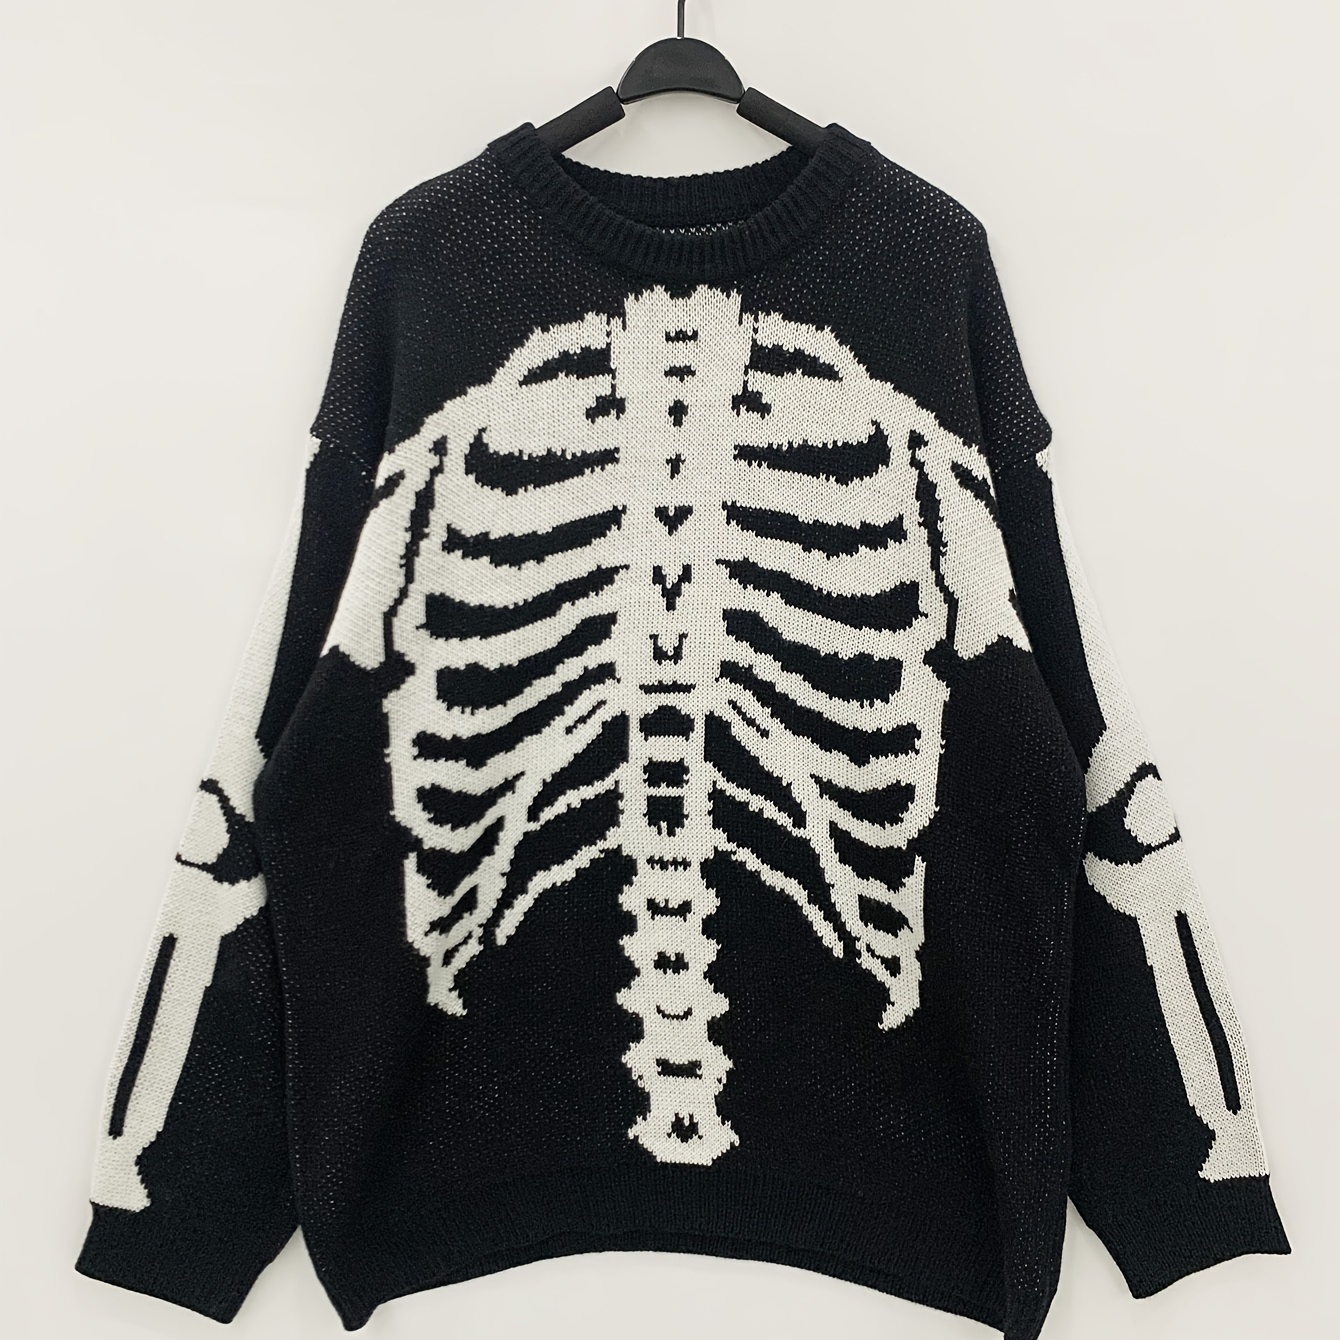 

Halloween Plus Size Men's Casual Sweater, Elastic Fashion Skeleton Print Long-sleeved Crew Neck Knit Pullover Sweater Jumper Tops, Best Sellers